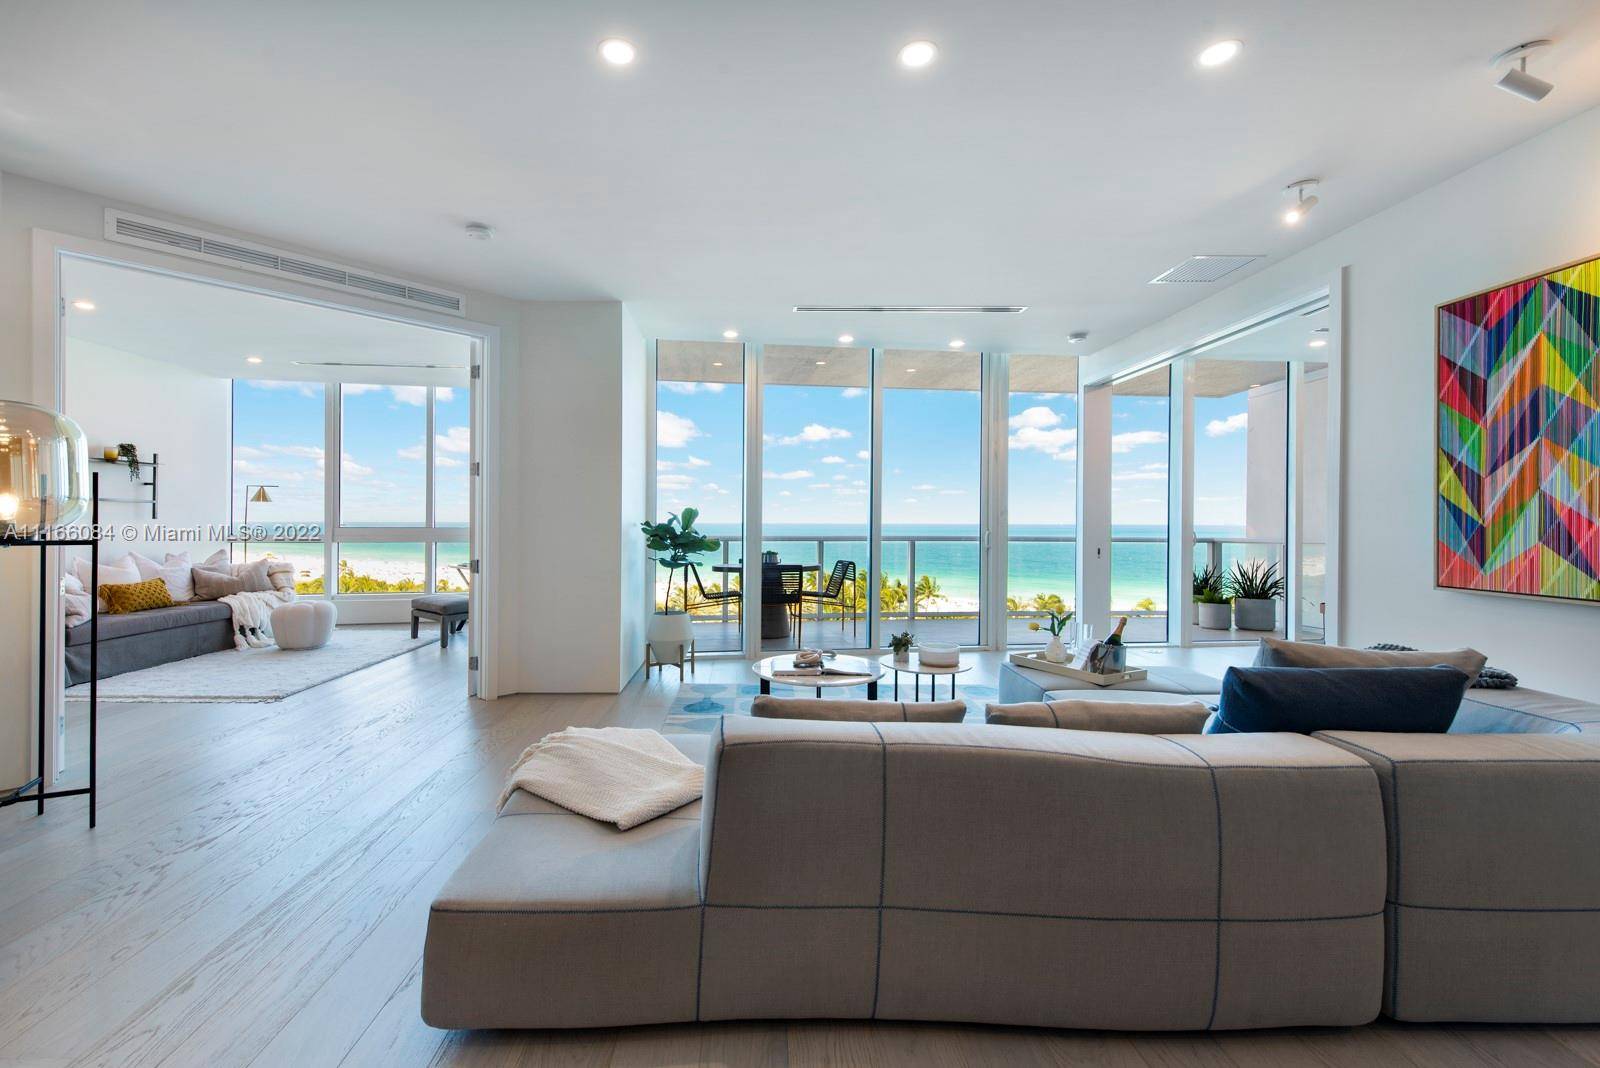 Influenced by the surrounding sand and ocean, this newly redesigned Continuum residence offers a unique open split floor plan and sweeping ocean views from every room.